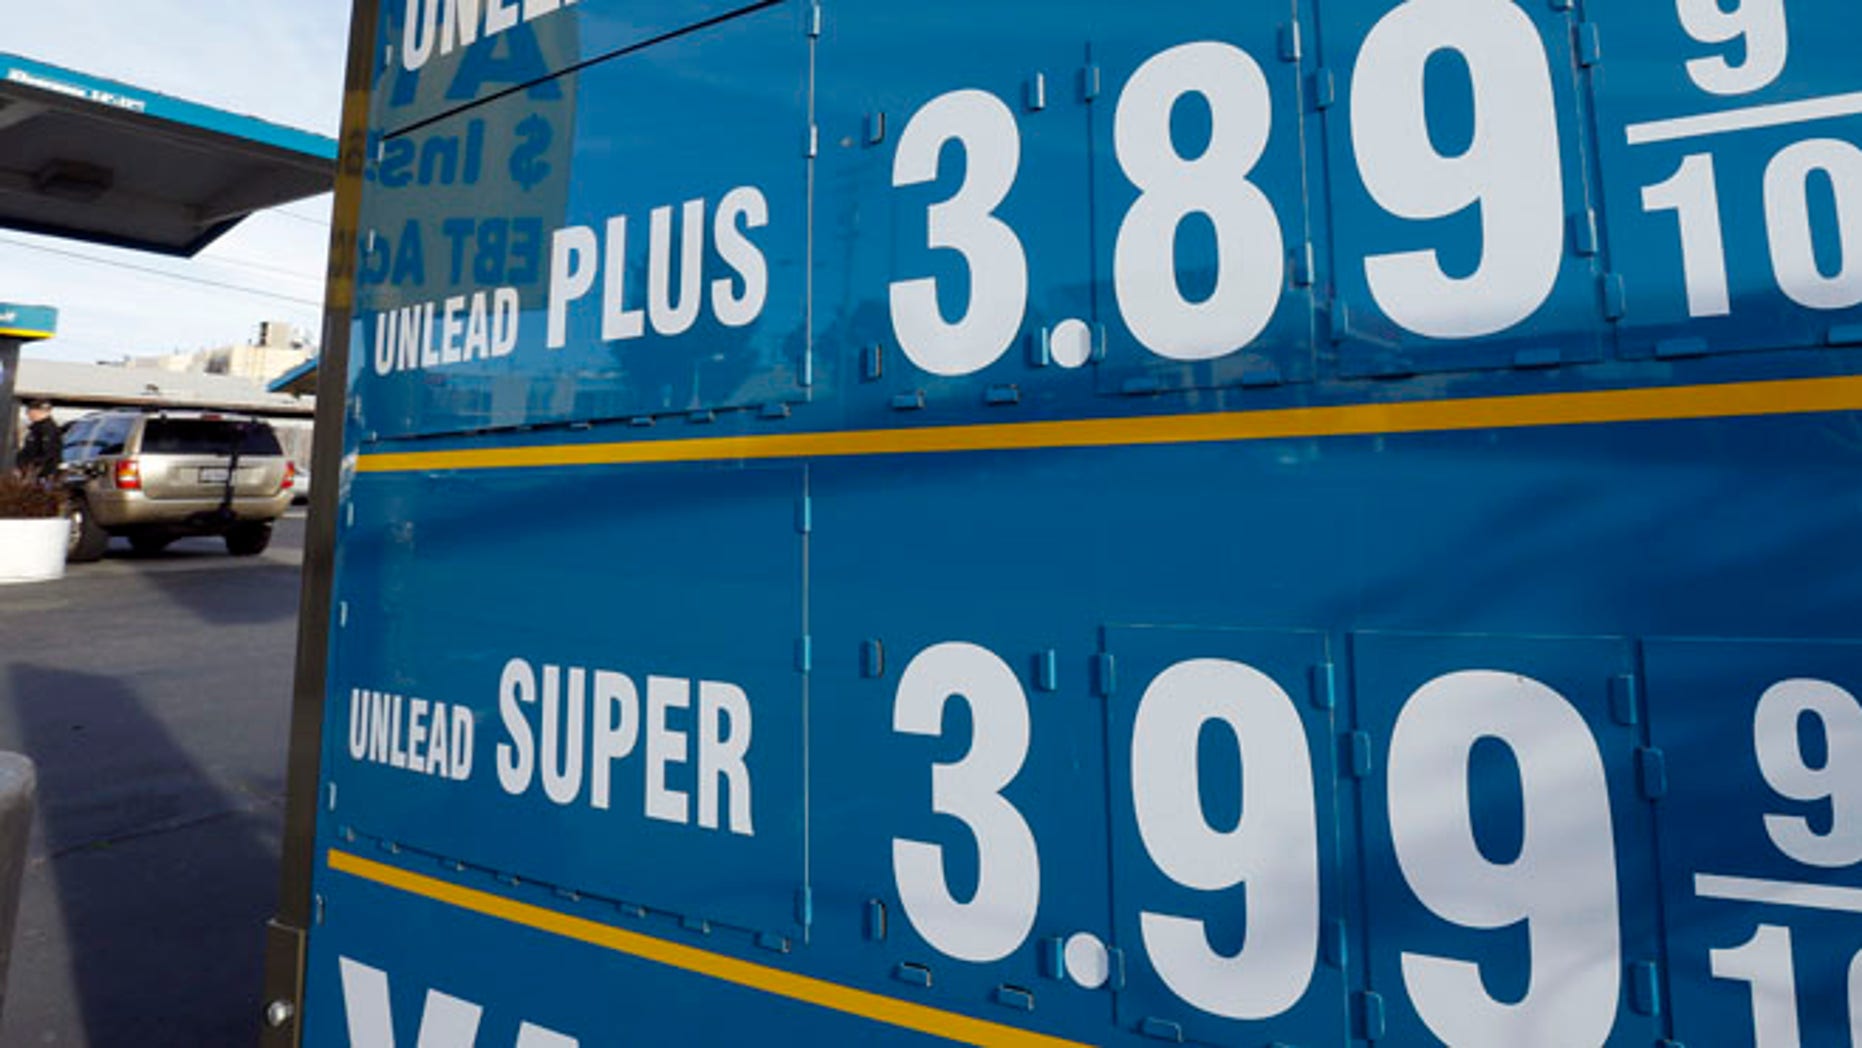 gasoline to cost more than expected in 2013 fox news fox news